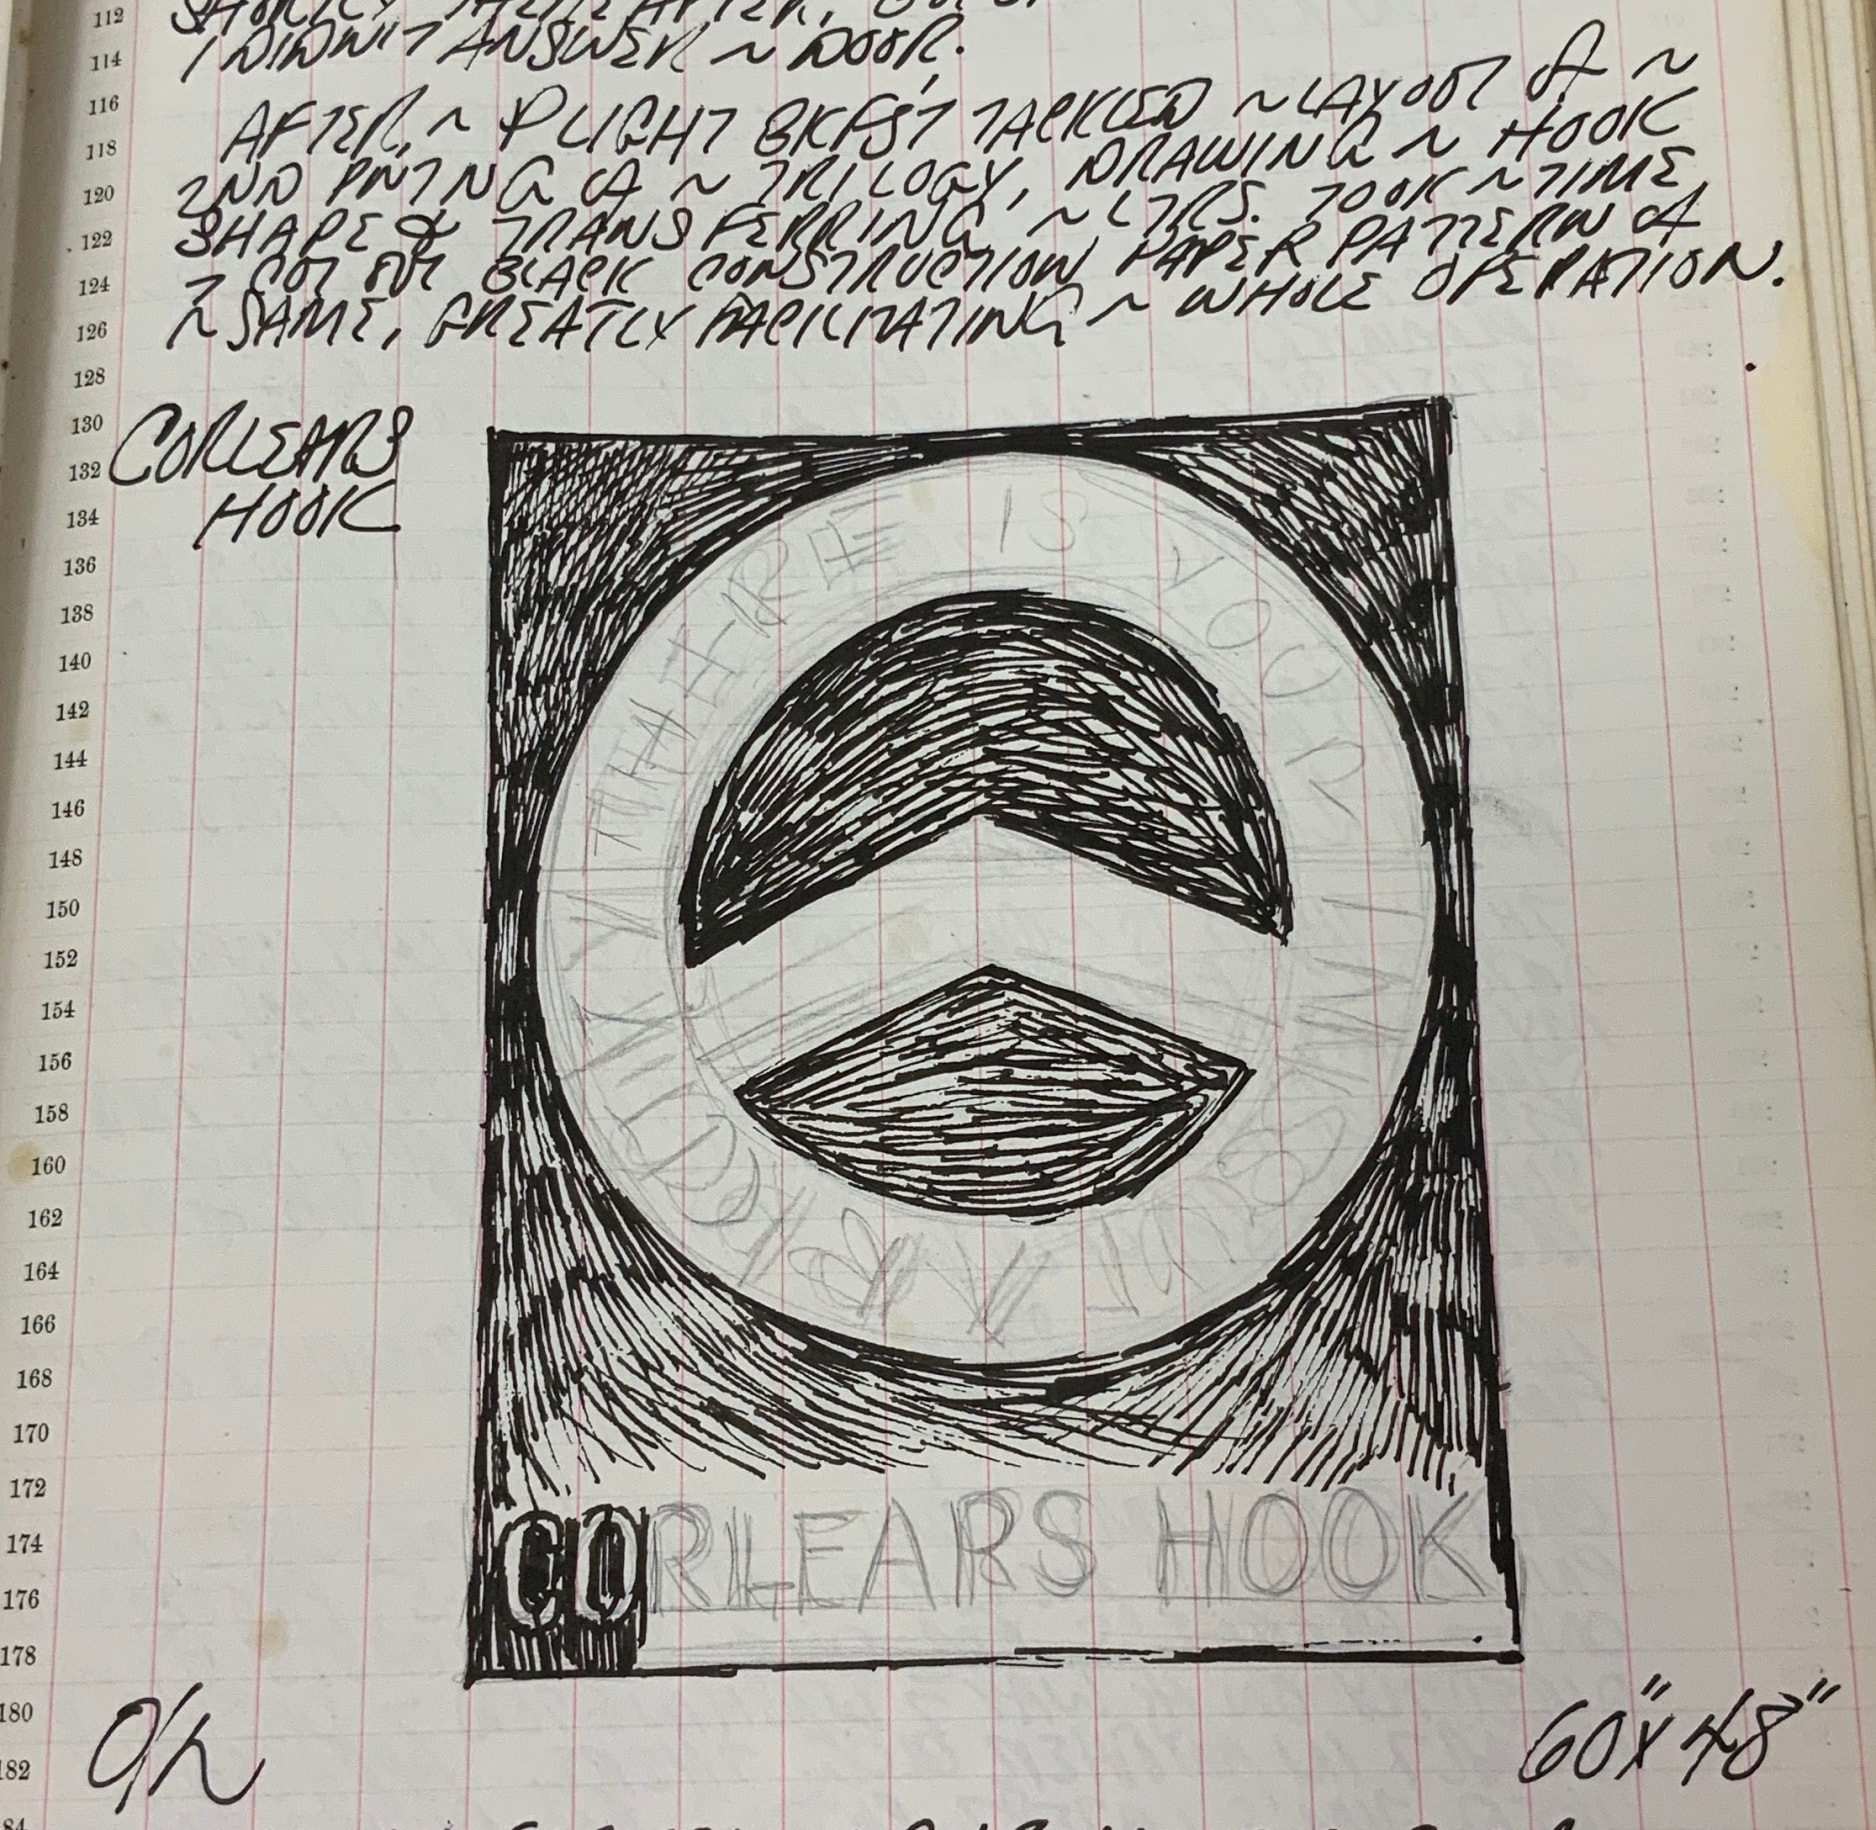 Detail from Robert Indiana's journal entry for June 20, 1962 with a sketch of the Corlear's Hook panel from The Melville Triptych